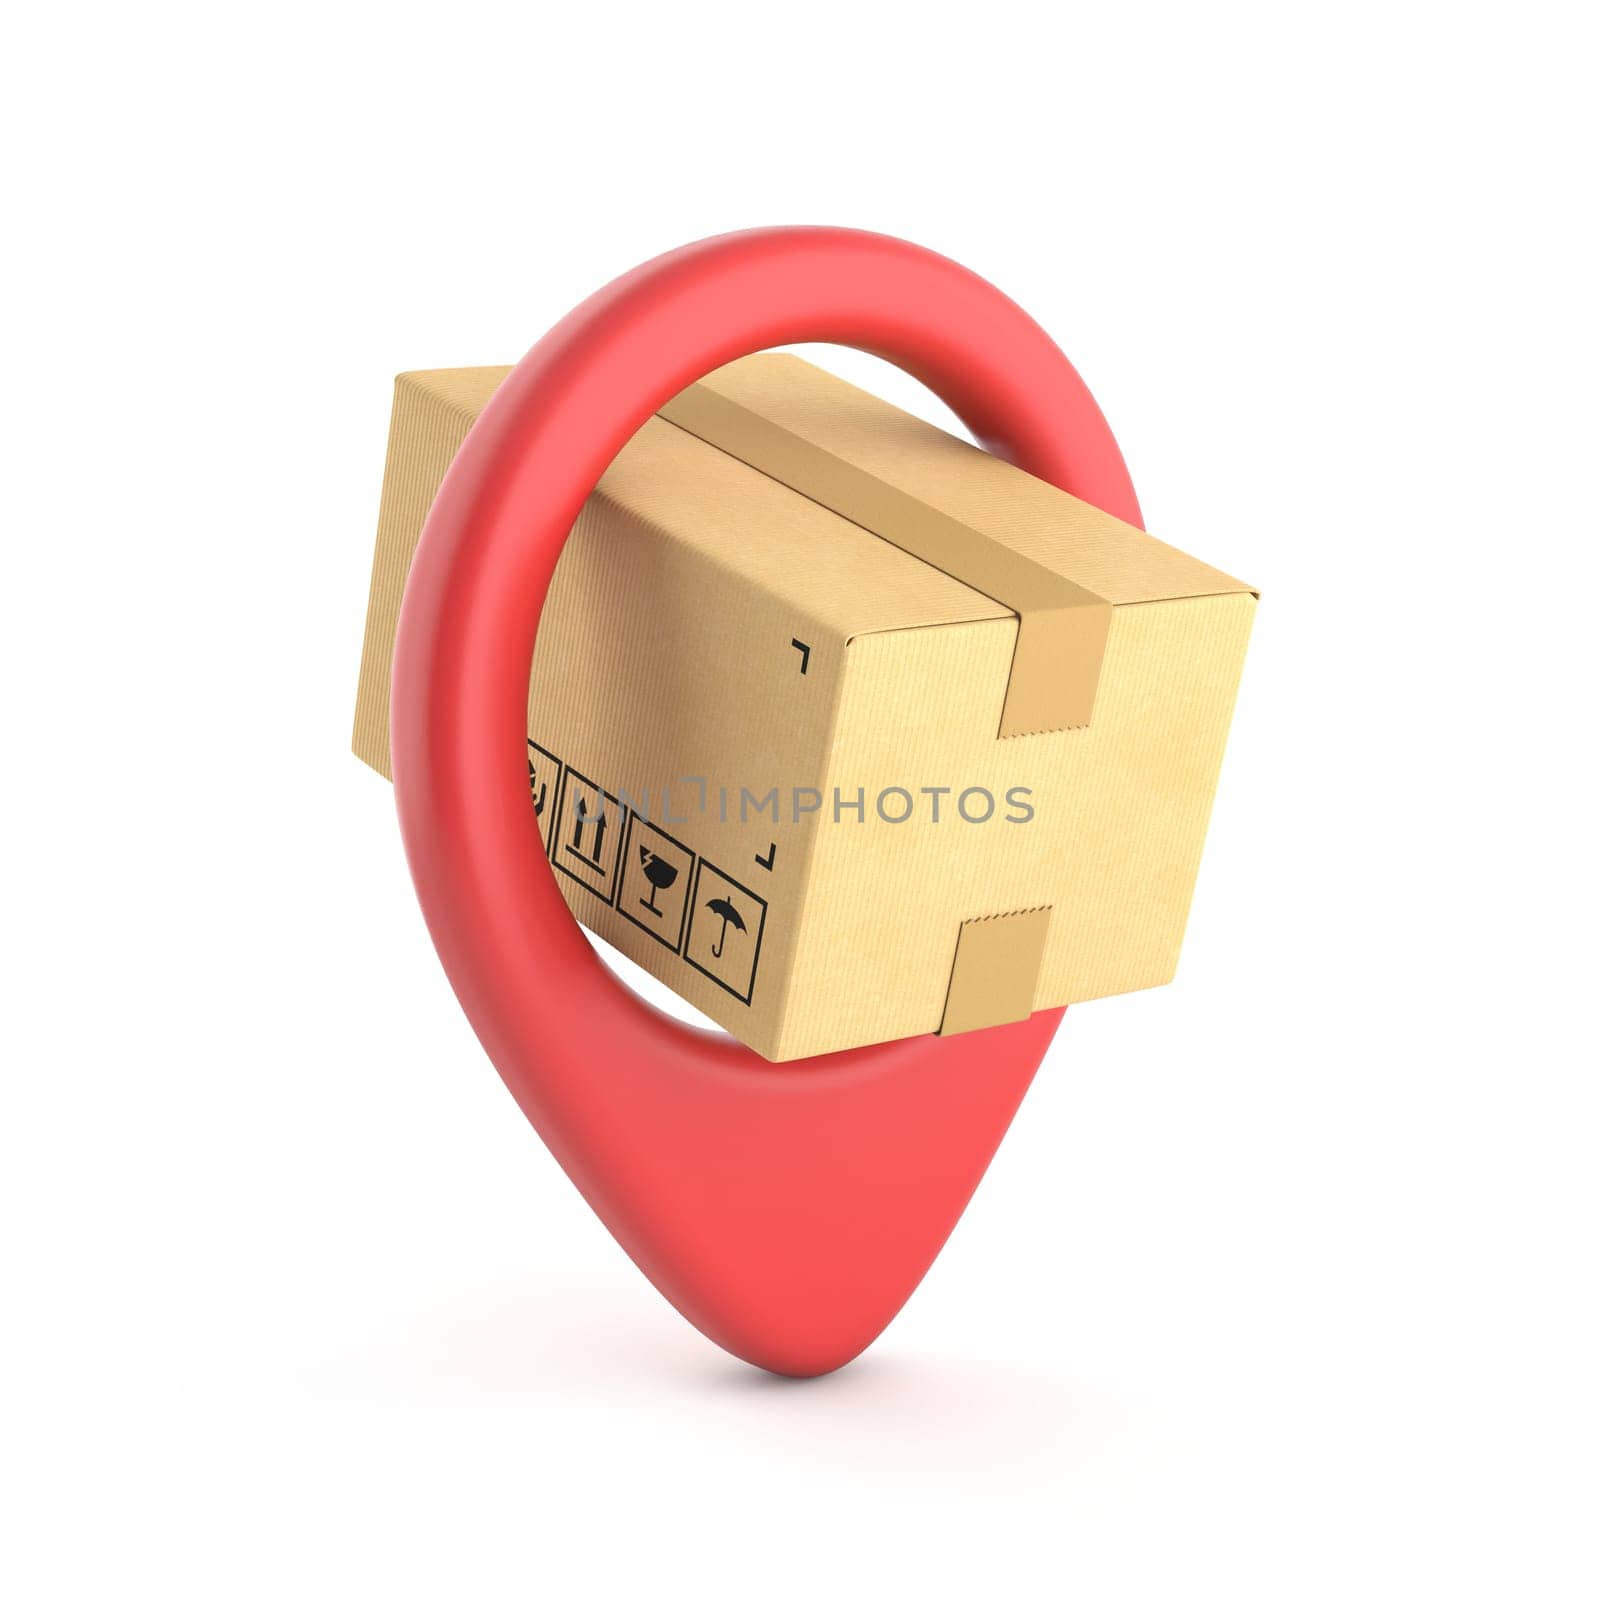 Cardboard box inside red map pointer 3D rendering illustration isolated on white background